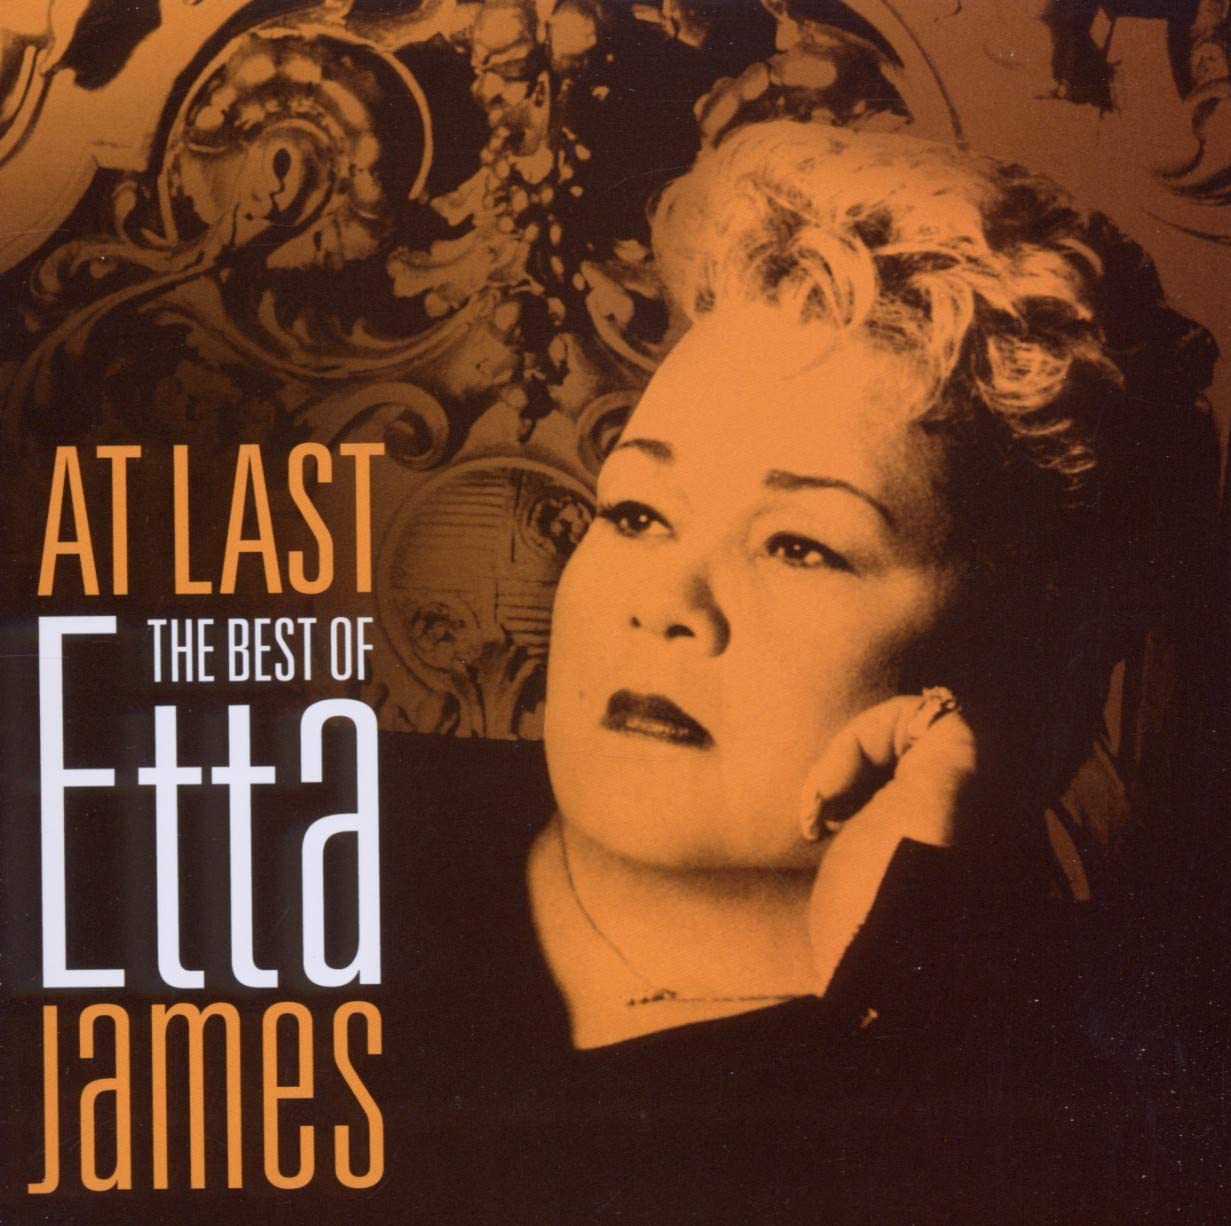 James, Etta/At Last: The Best of [CD]